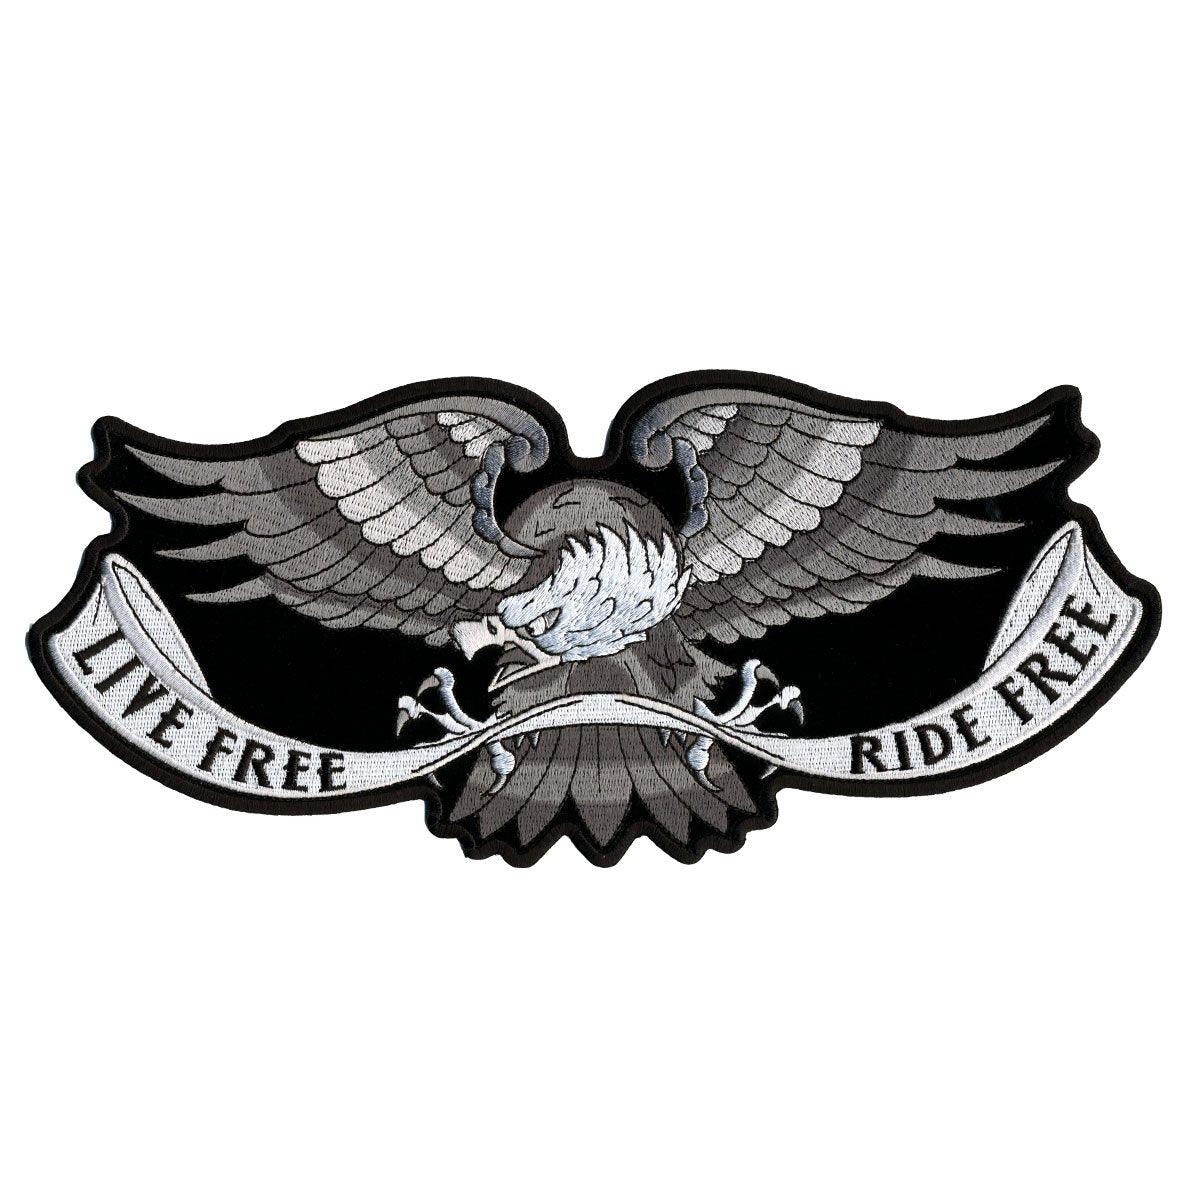 Live Free Eagle 11" x 5" Patch - Military Republic